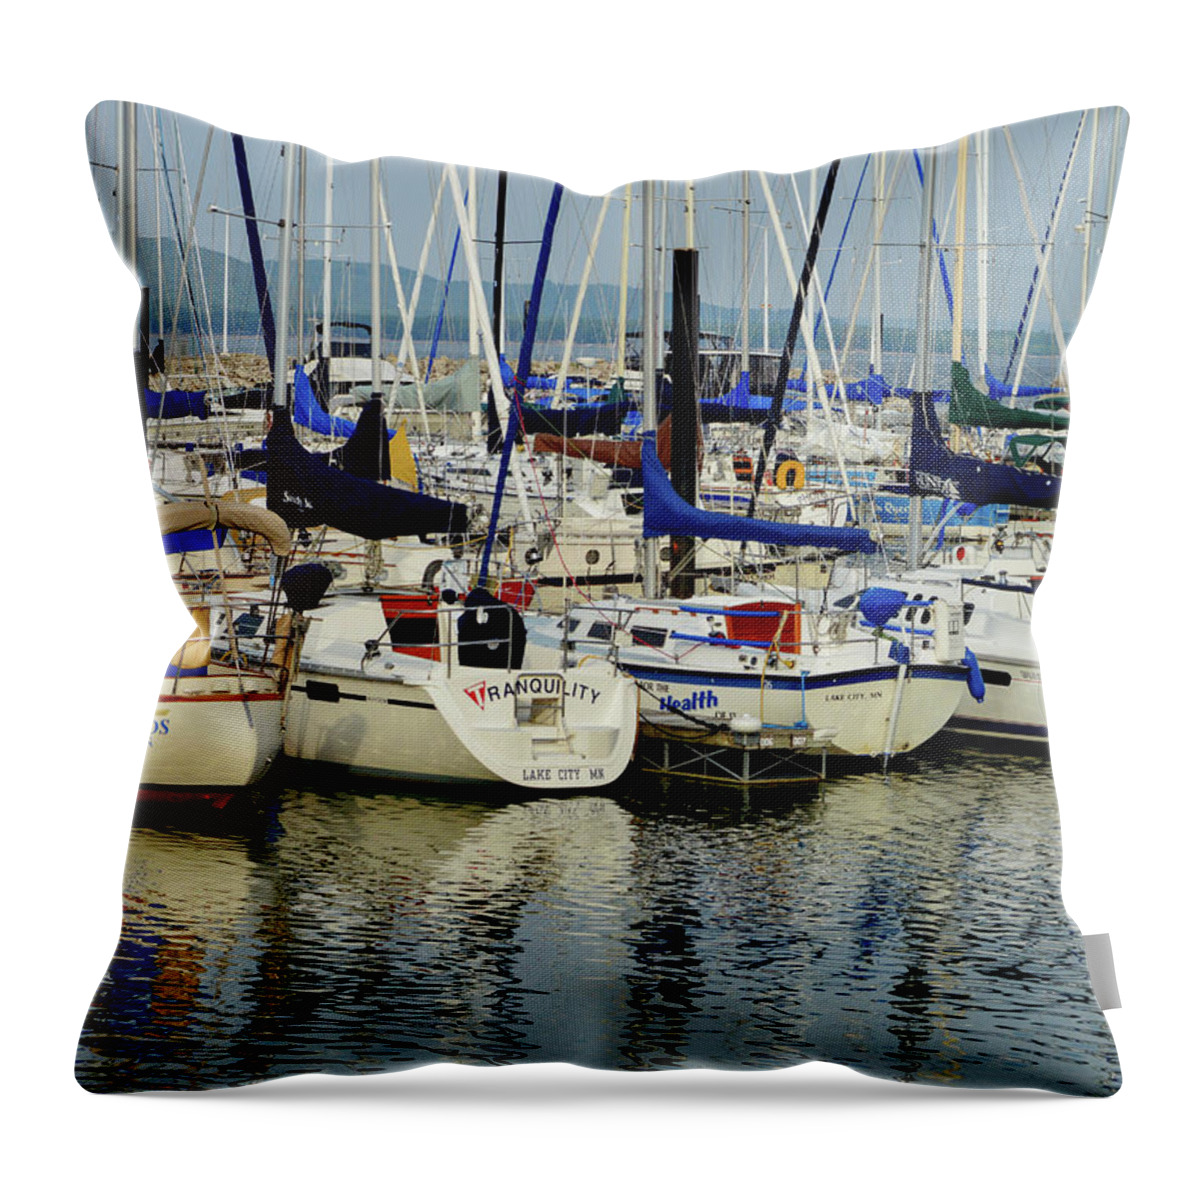 Lake City Marina Throw Pillow featuring the photograph Calm Waters by Susie Loechler